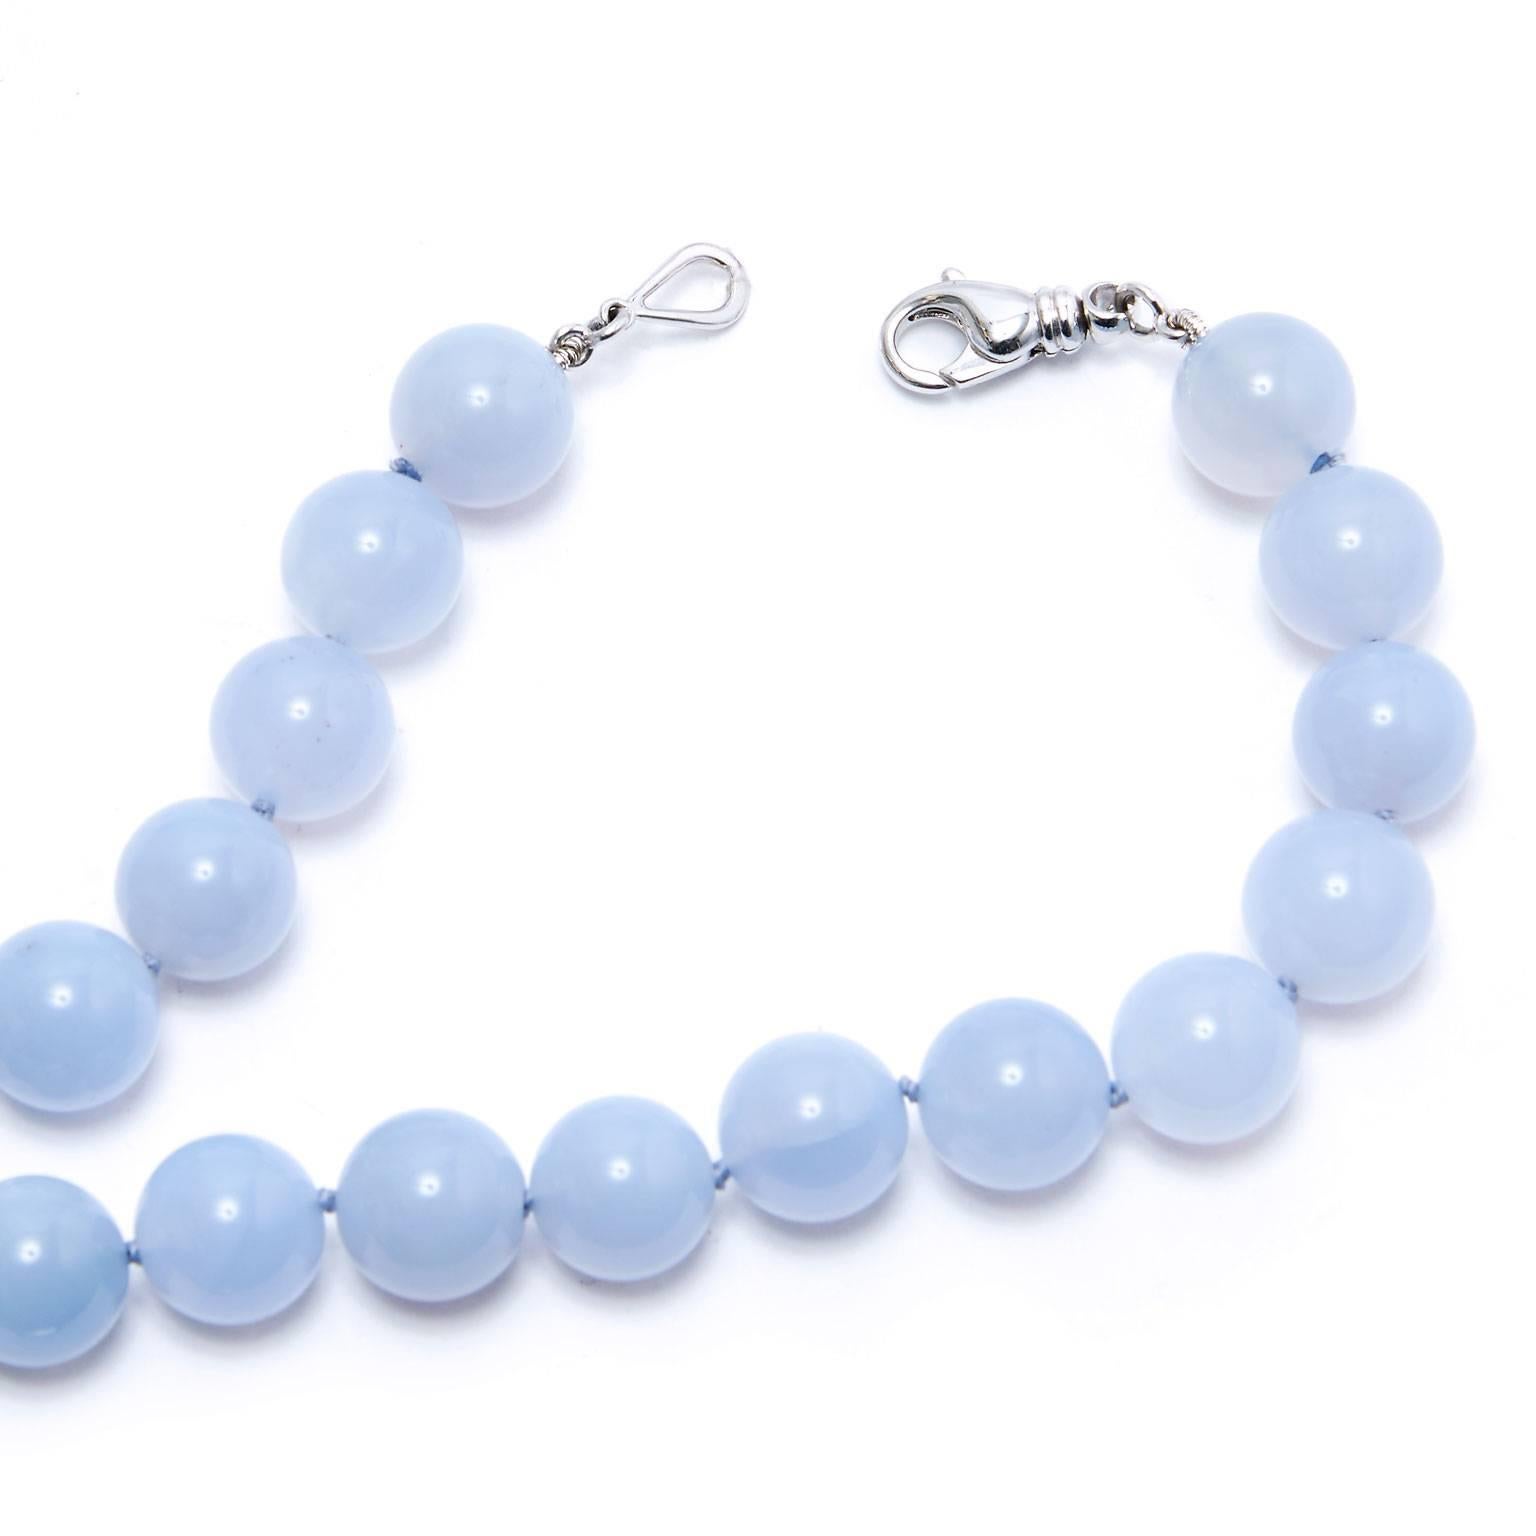 Misty chalcedony with its cool and serene appearance come together as 14 millimeter beads in this charming, handmade H and H beaded necklace featuring an 18 karat white gold lobster clasp.